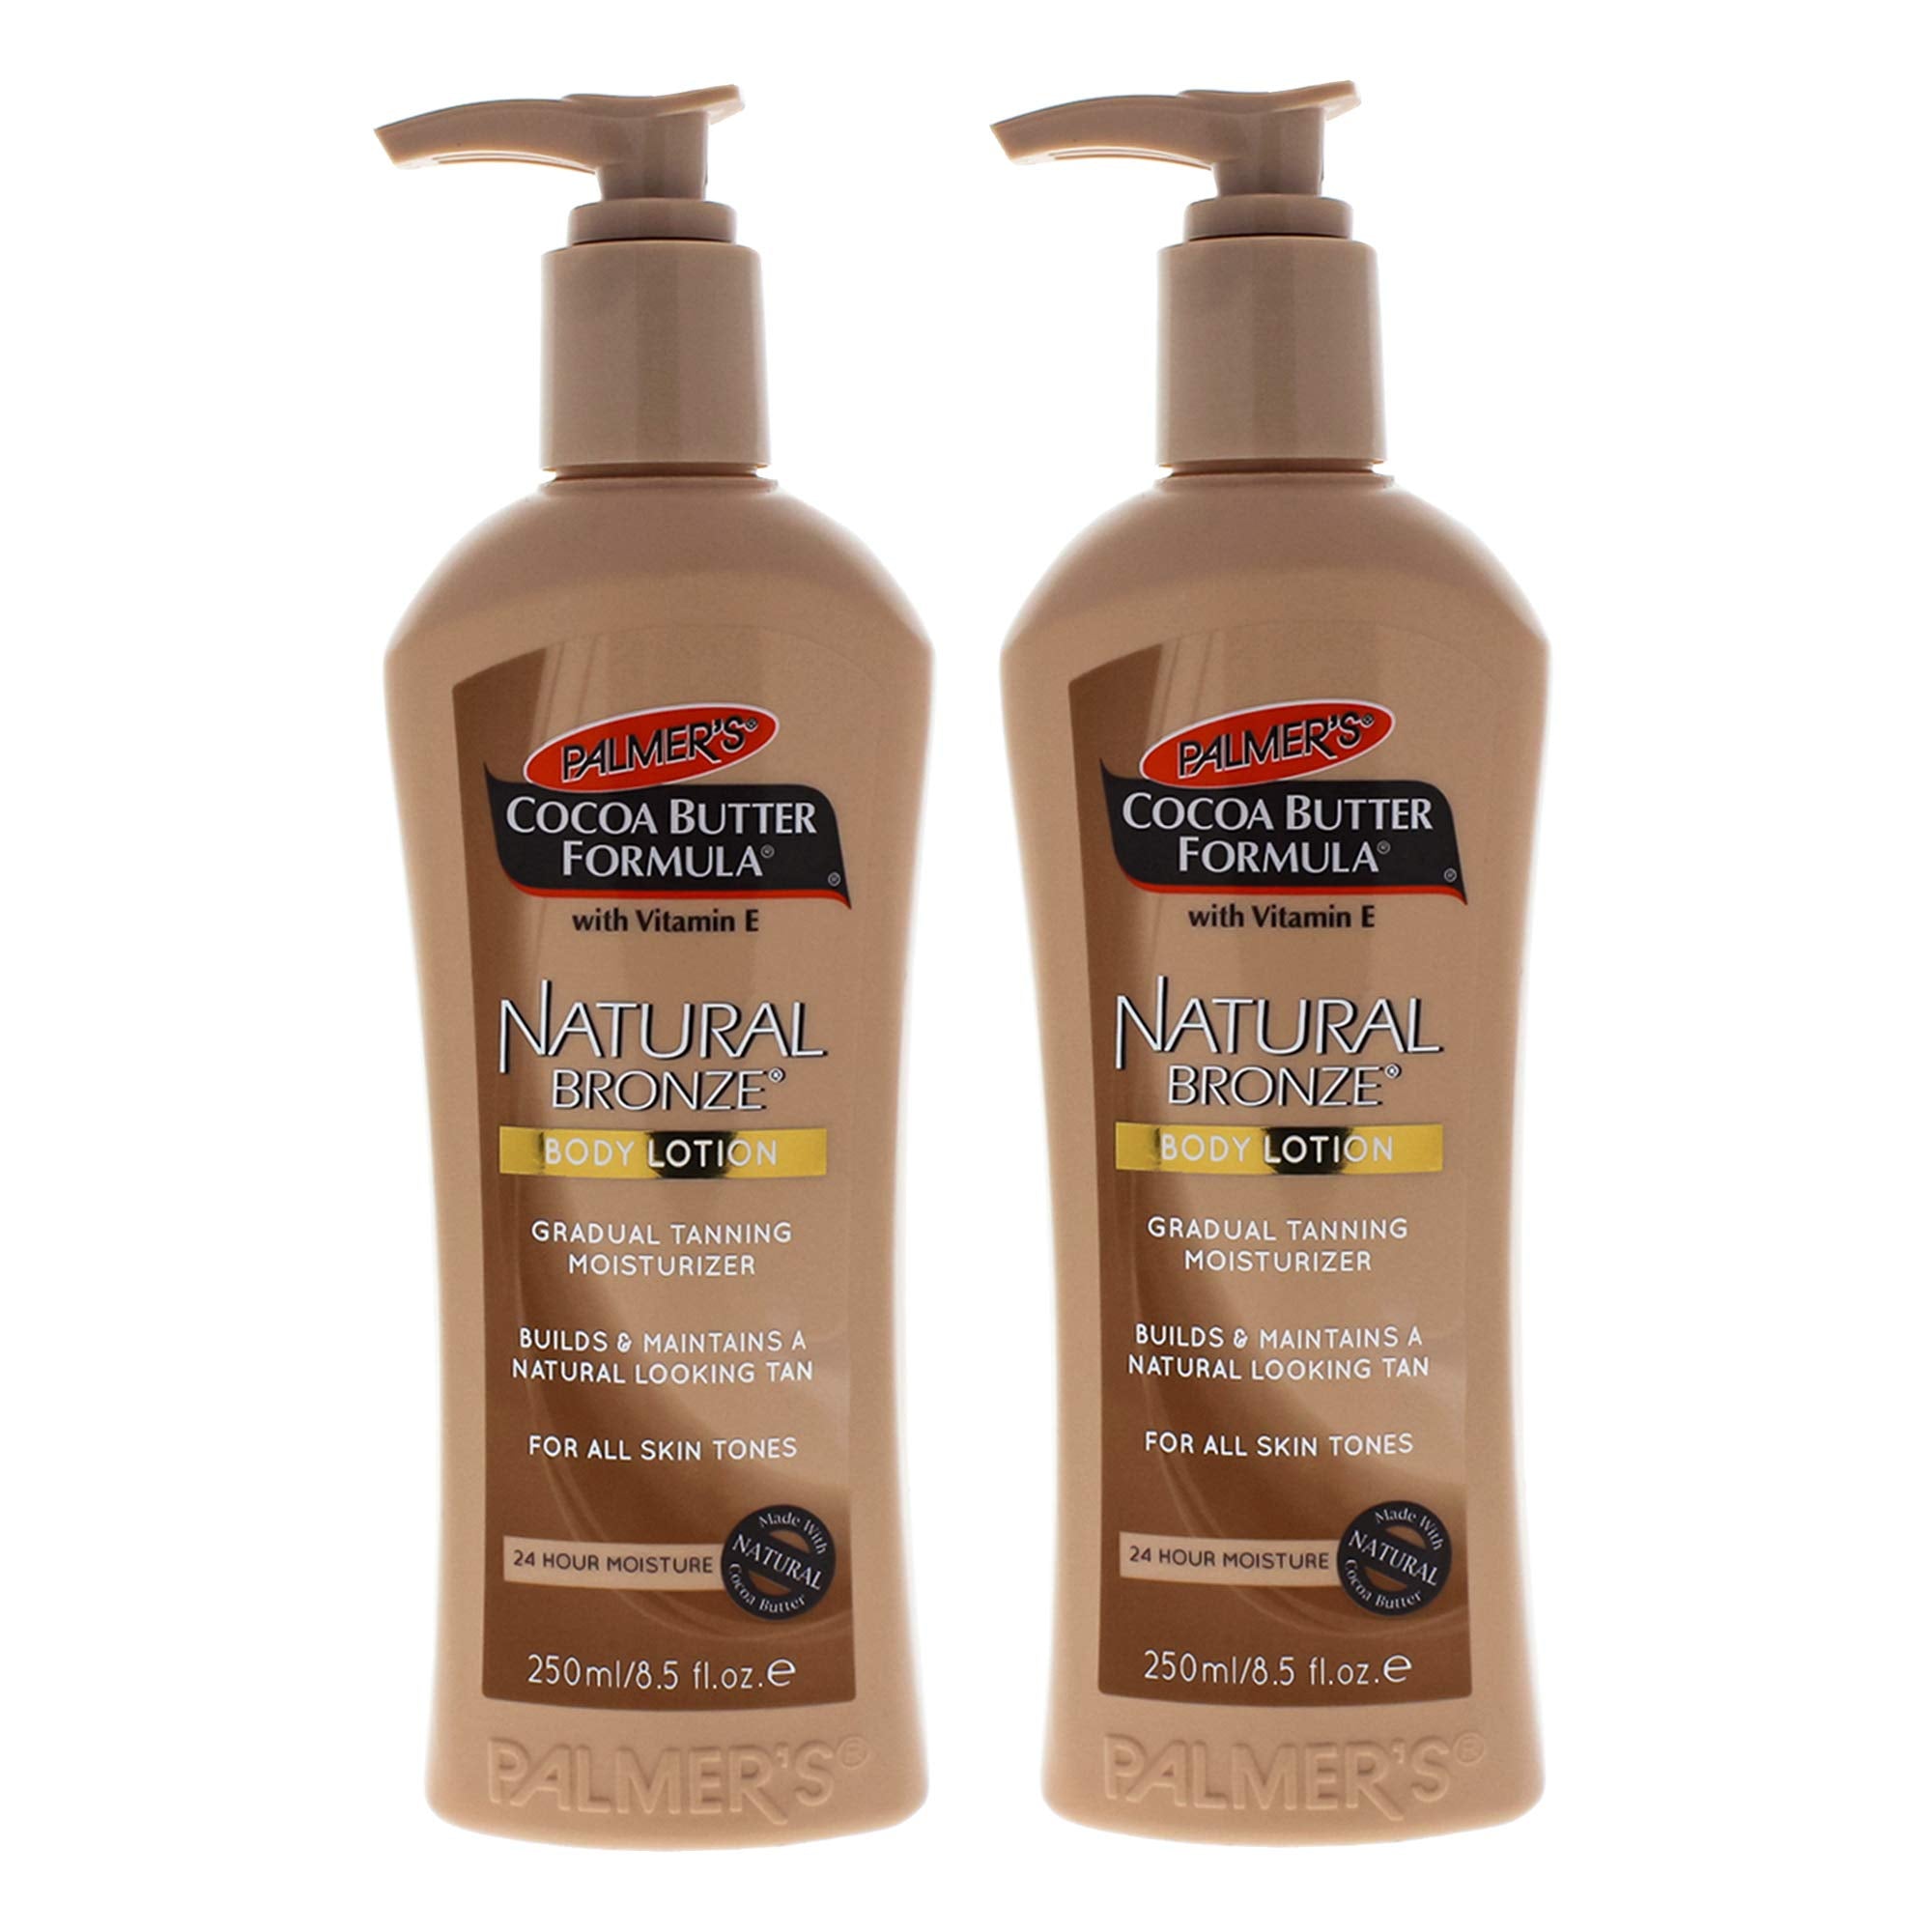 Cocoa Butter Natural Bronze Body Lotion by Palmers for Unisex - 8.5 oz Body Lotion - Pack of 2